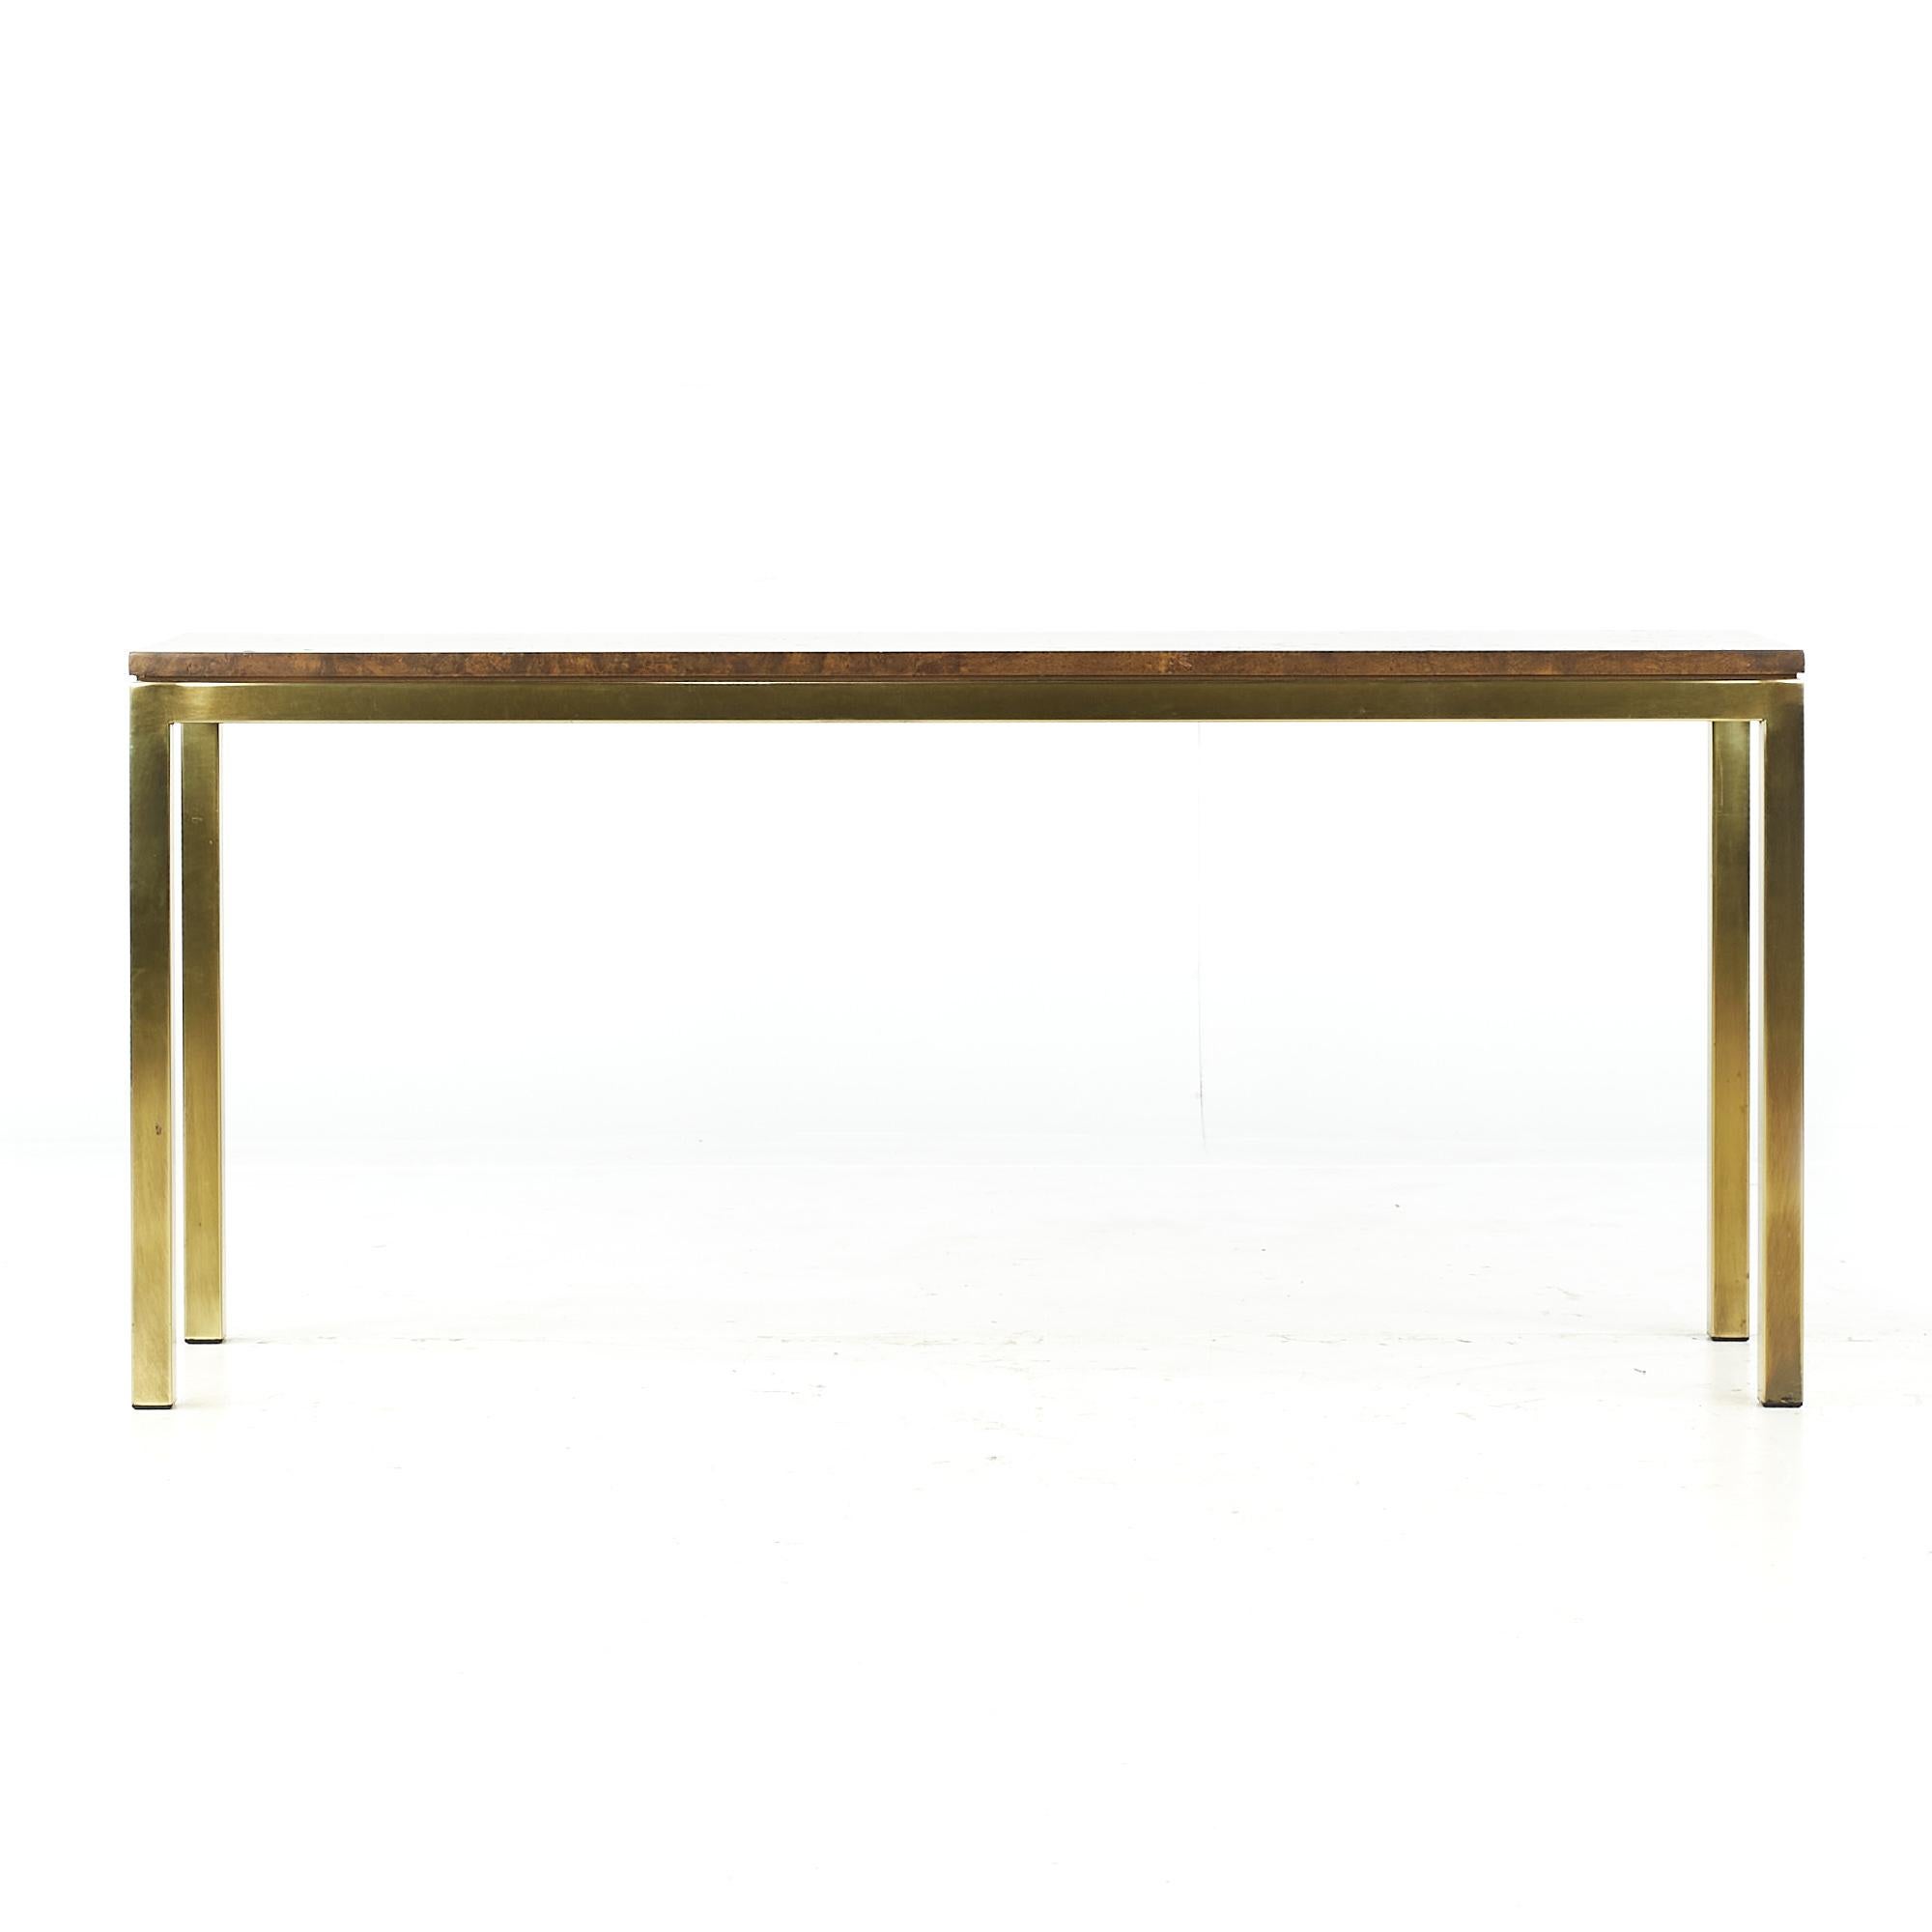 Tomlinson mid century burlwood and brass console table

This table measures: 60 wide x 16 deep x 27.25 inches high

All pieces of furniture can be had in what we call restored vintage condition. That means the piece is restored upon purchase so